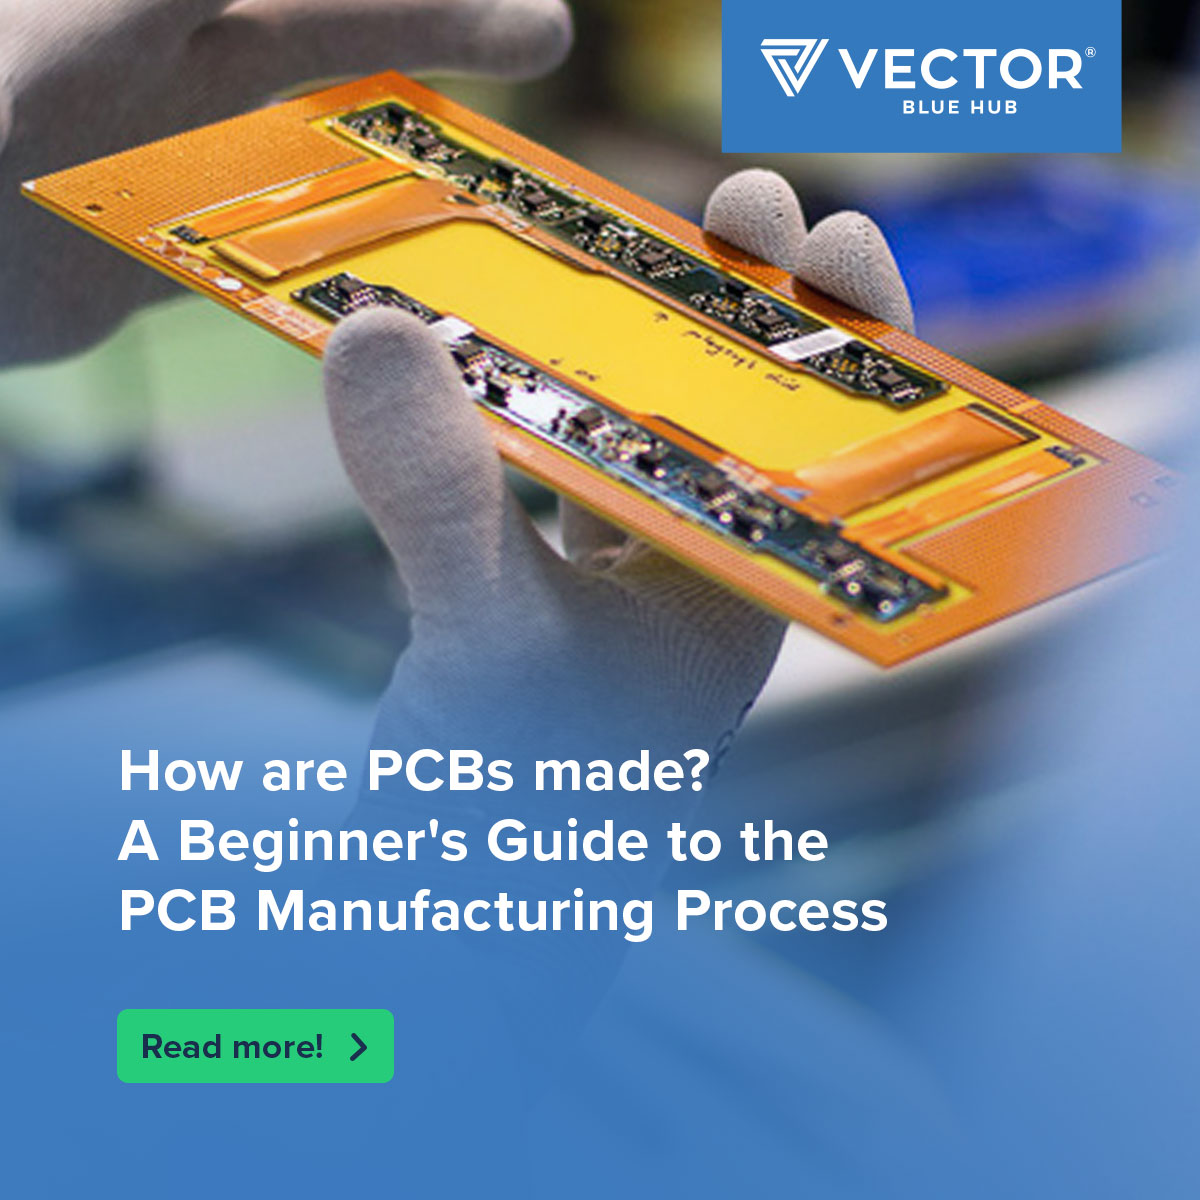 How are PCBs made? A Guide to the PCB Manufacturing Process